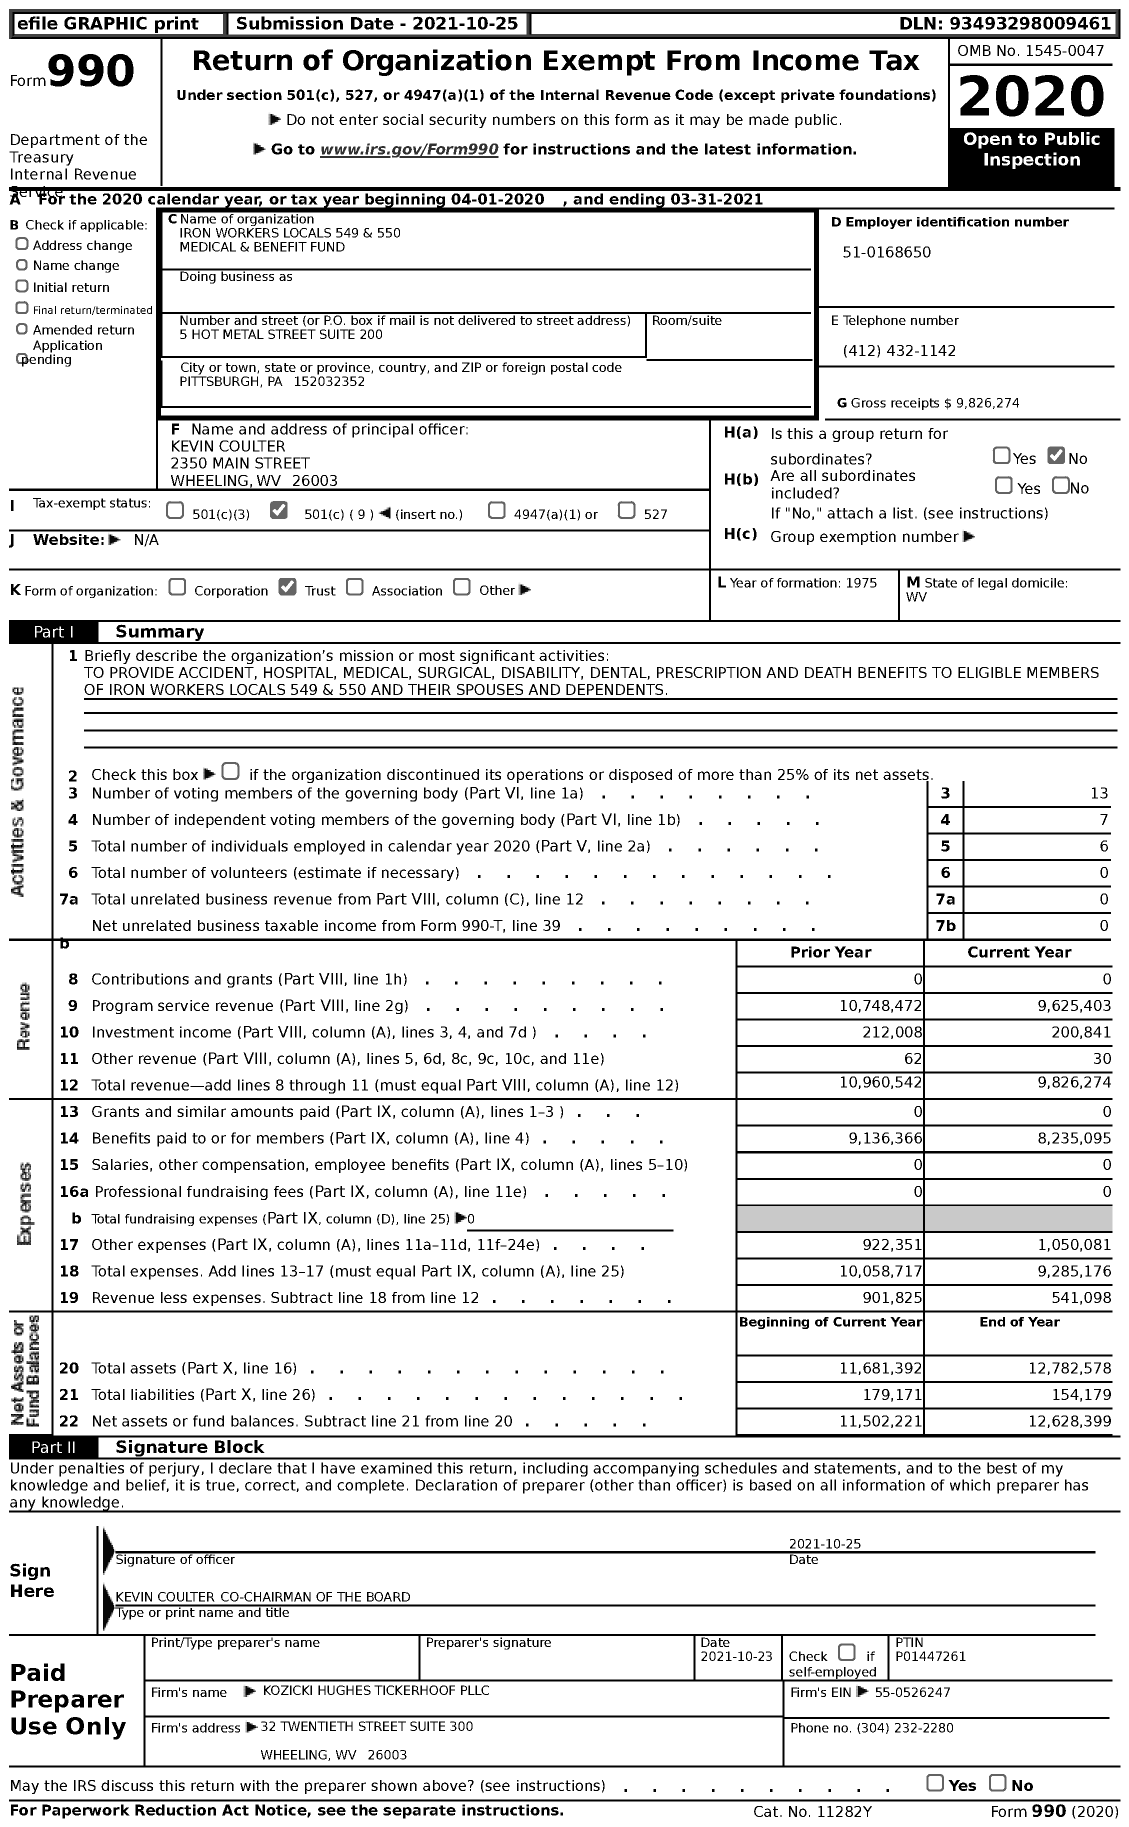 Image of first page of 2020 Form 990 for Iron Workers Locals 549 and 550 Medical and Benefit Fund